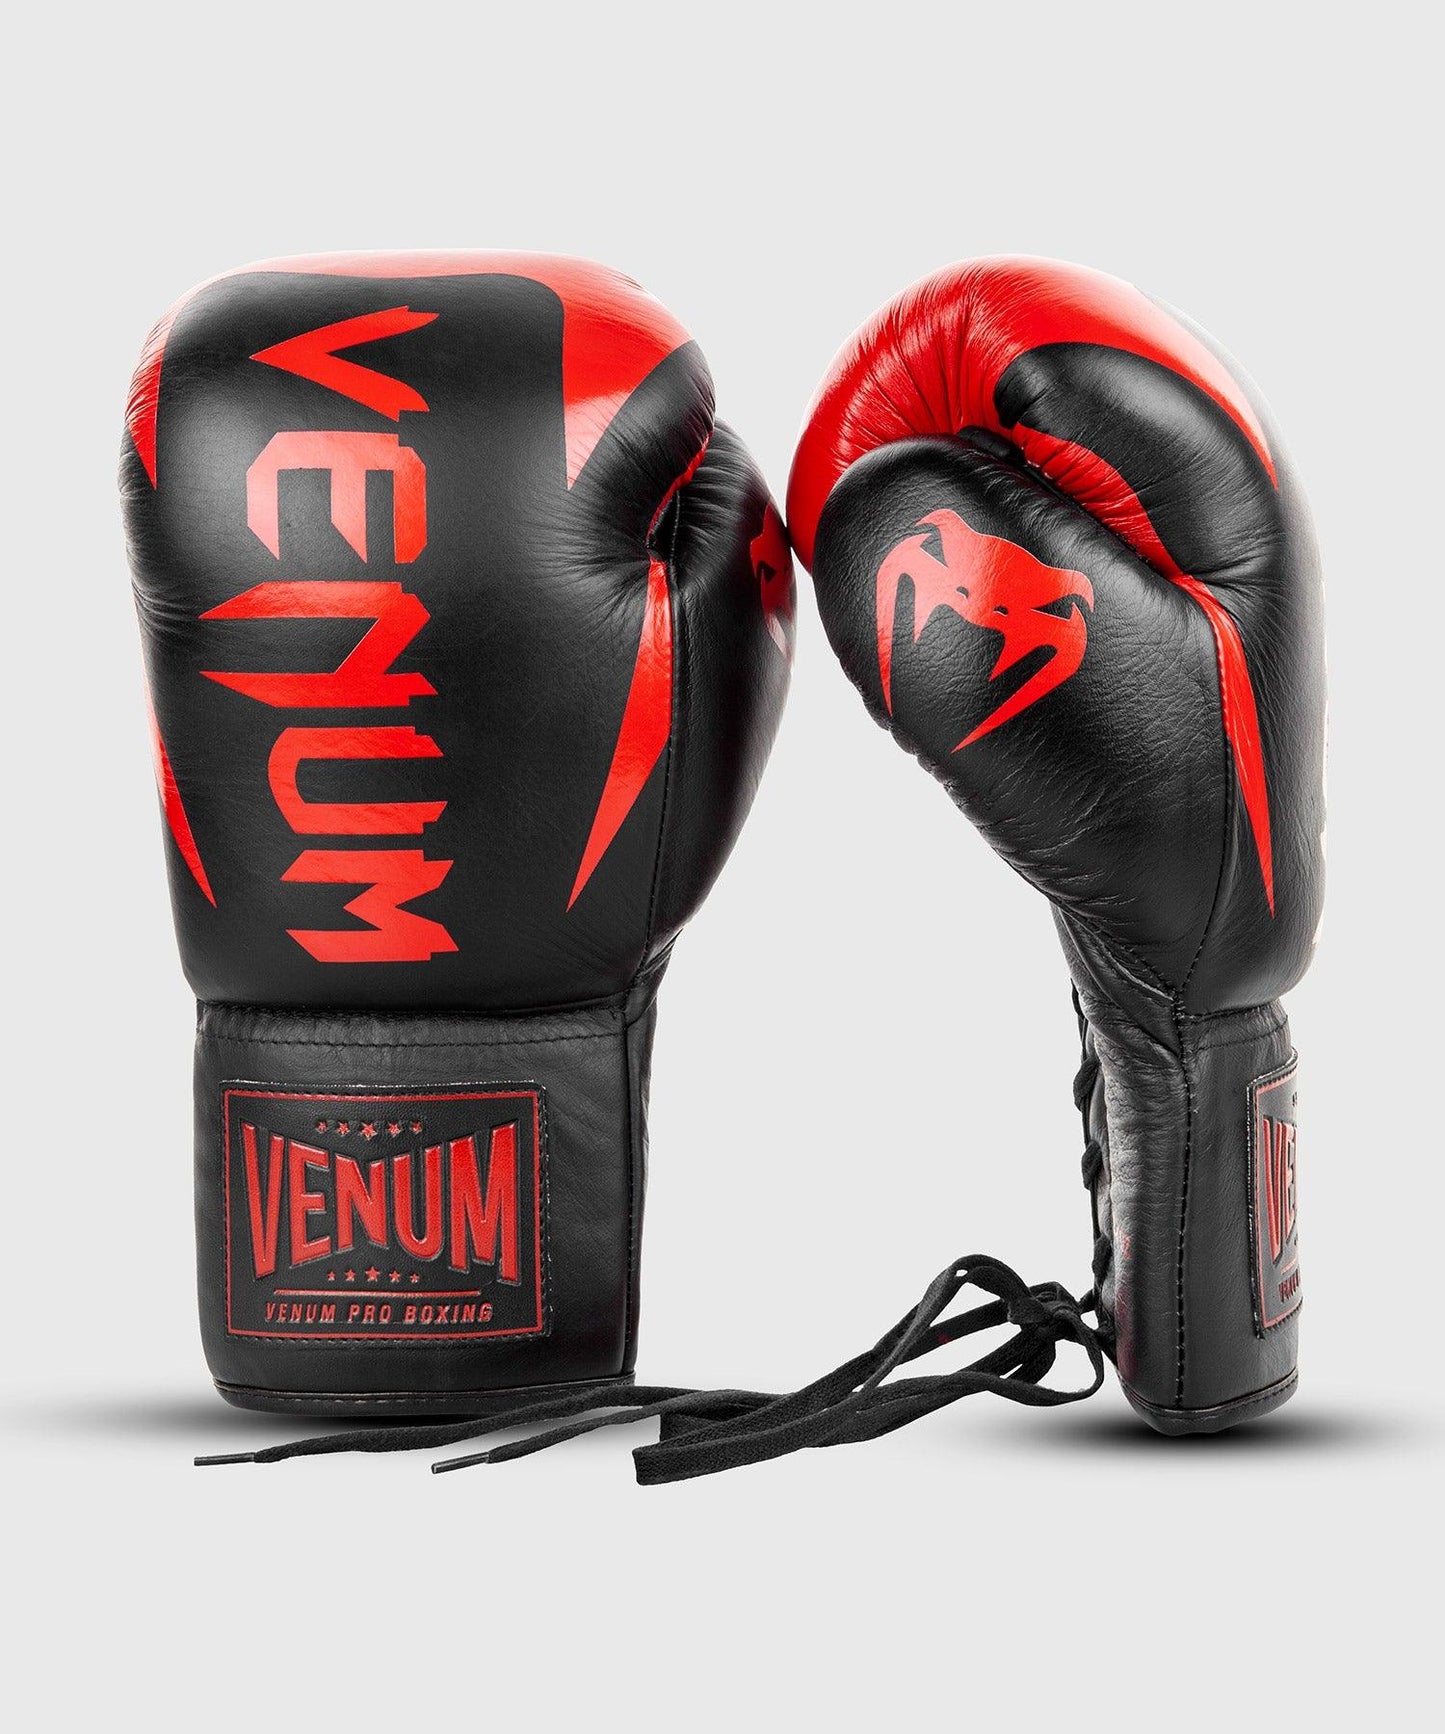 Venum Hammer Pro Boxing Gloves - With Laces - Black/Red Picture 2